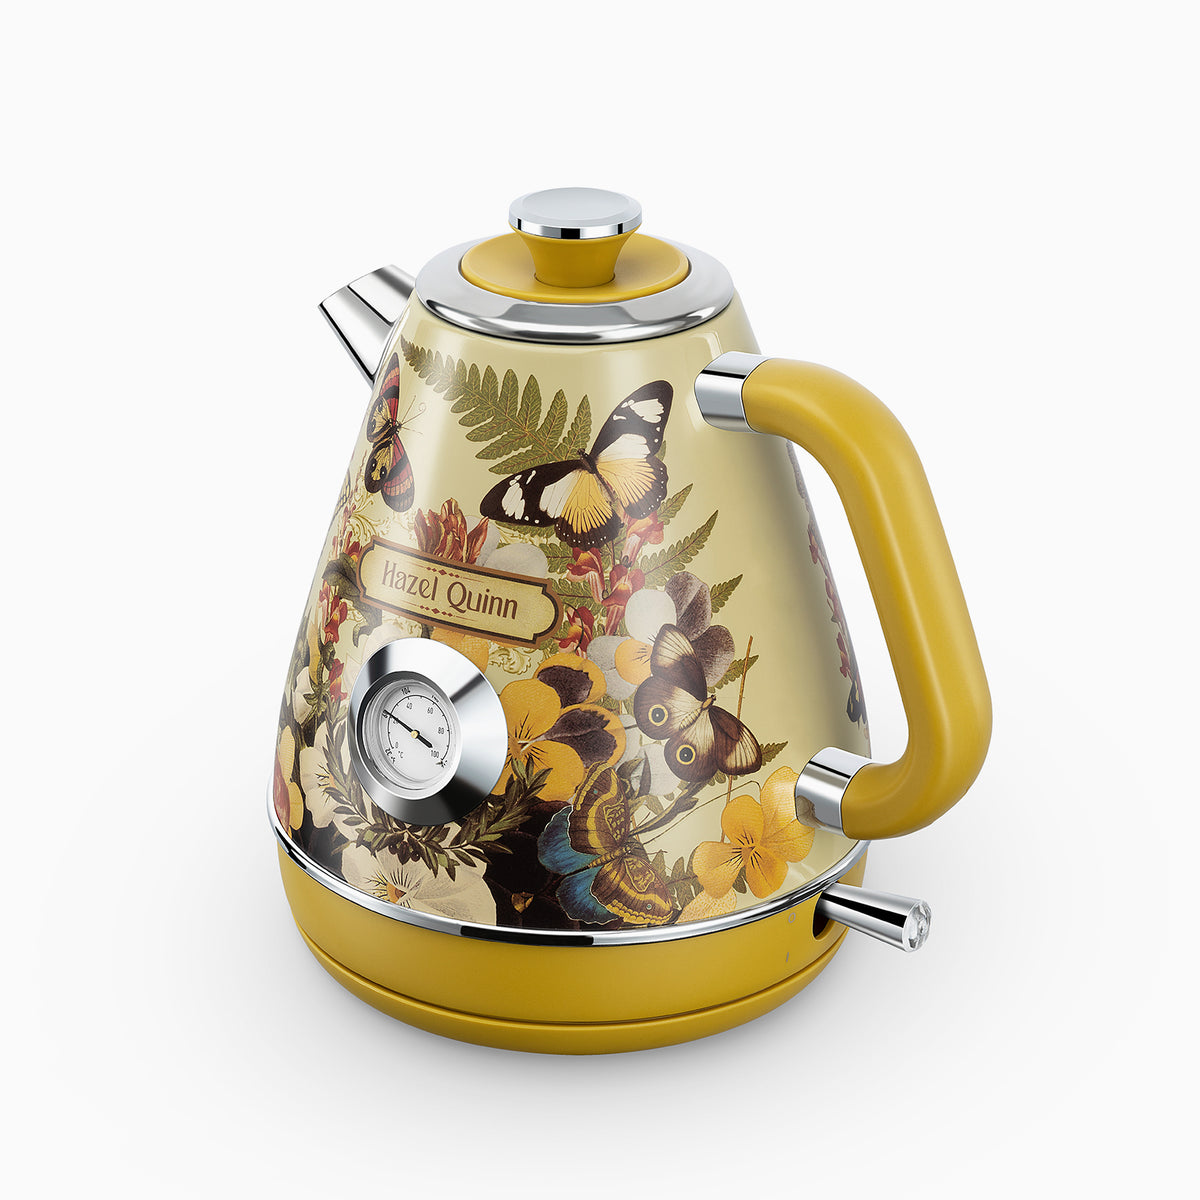 Jointly-Designed Electric Kettle by Eduardo Recife, with Food Grade 304  Stainless Steel, Dial Thermometer, 1.7 L, Artworks Pasted by Hand